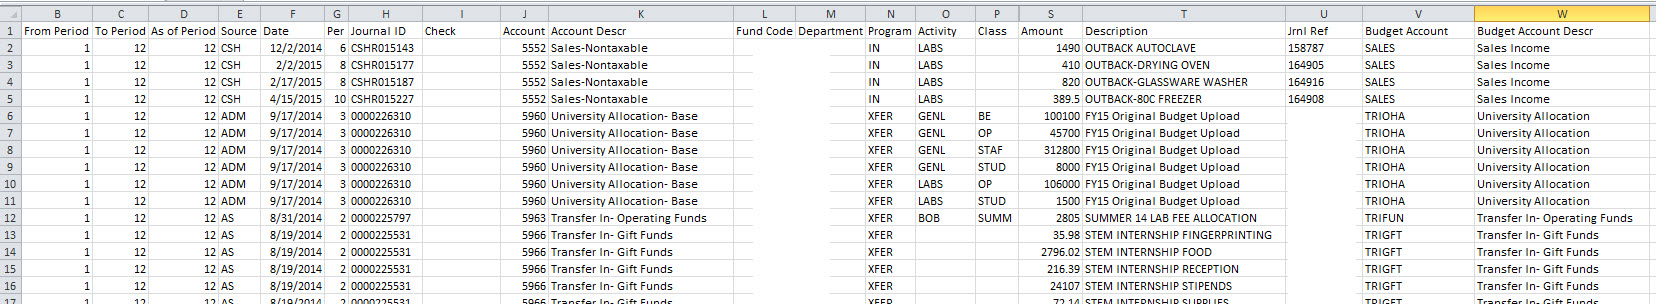 Sample screenshot of ATD report .csv file showing budget account